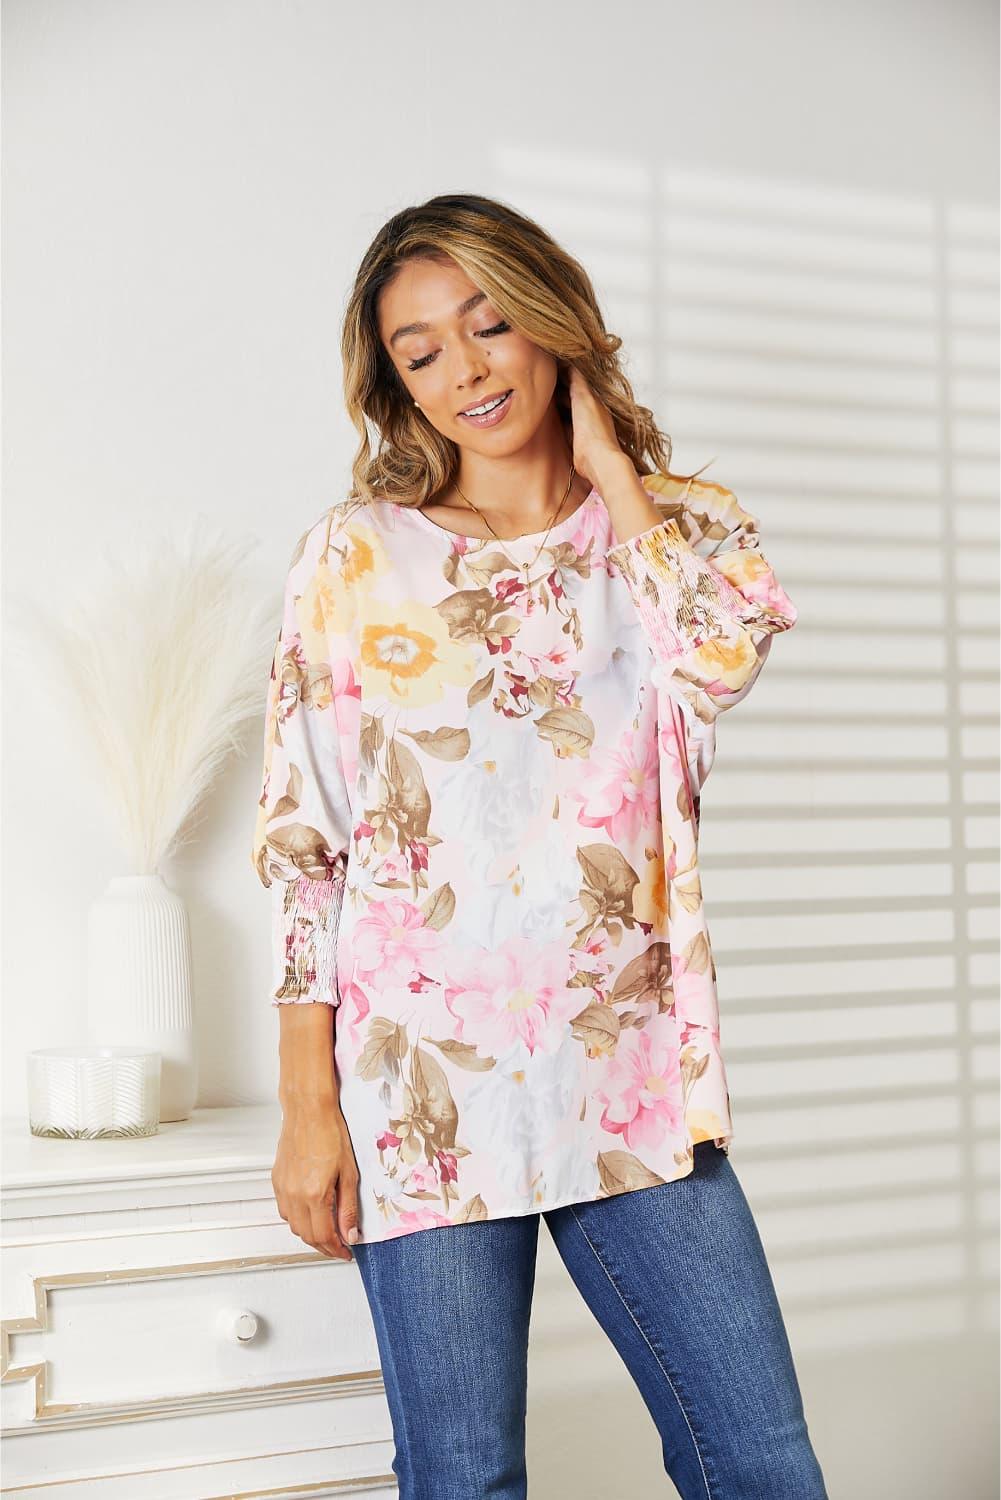 Double Take Floral Round Neck Three-Quarter Sleeve Top - Lab Fashion, Home & Health